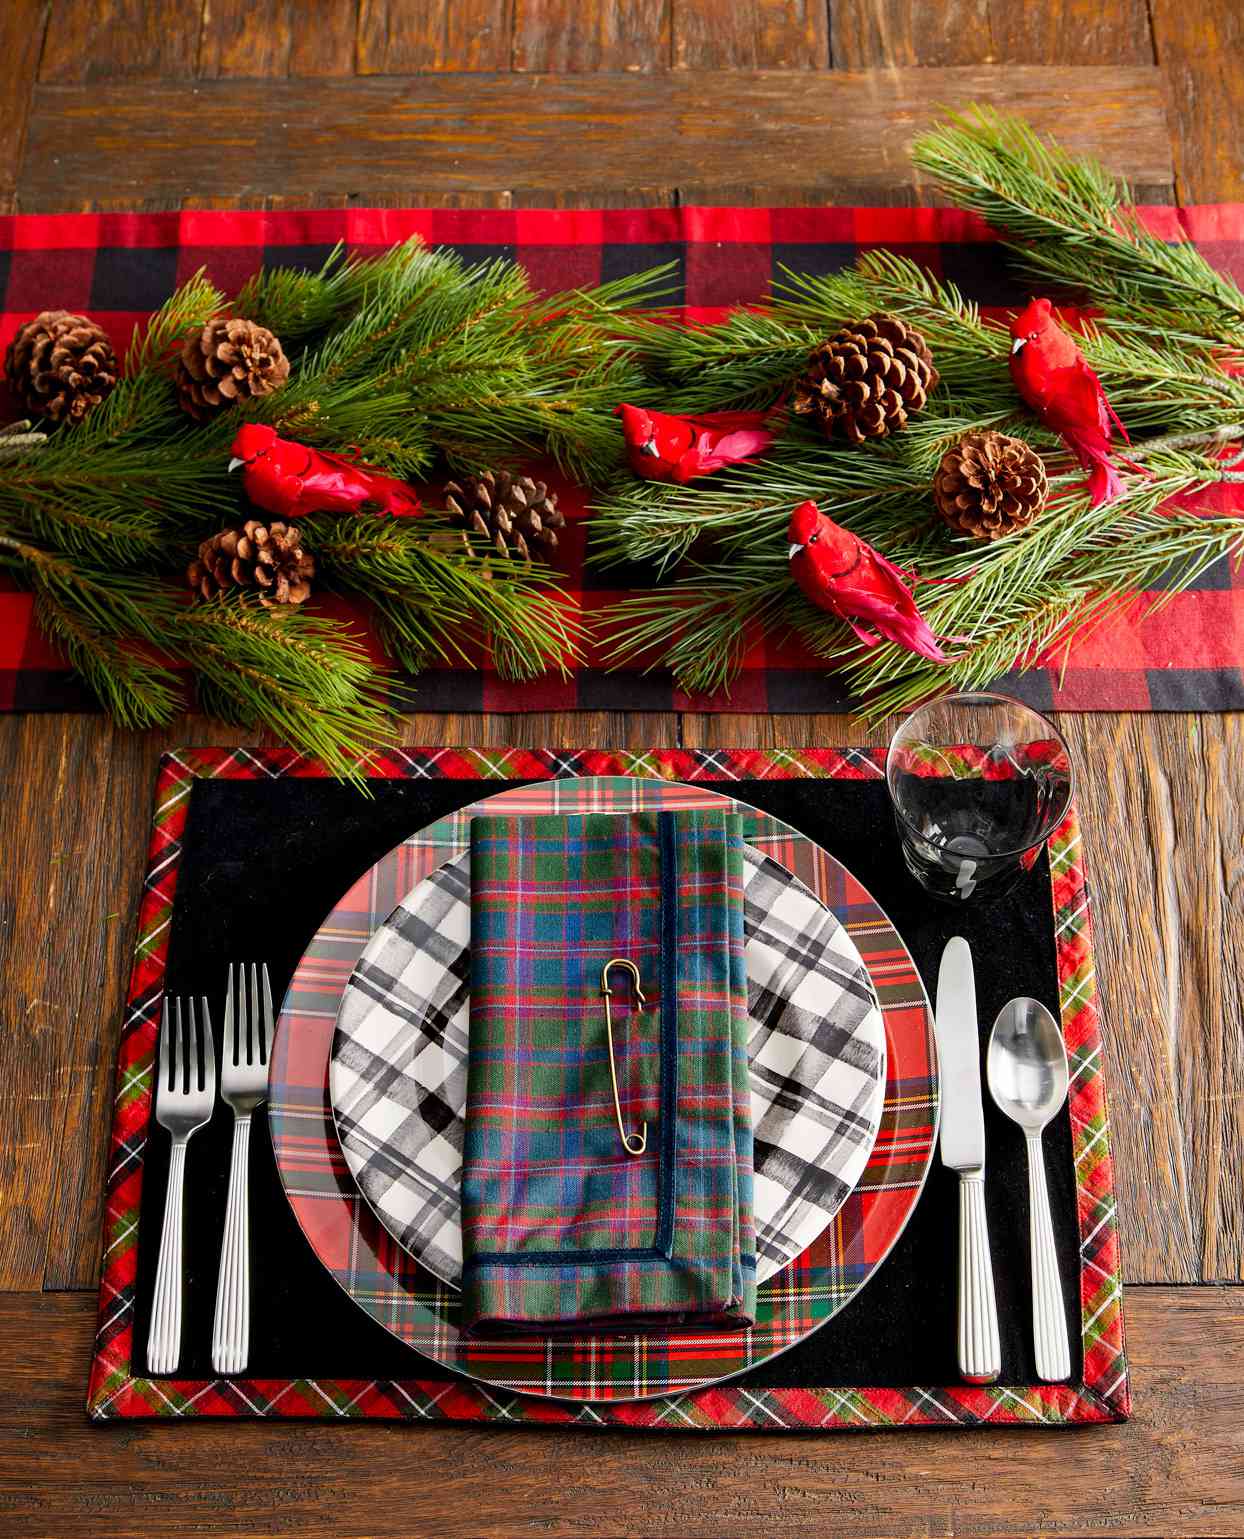 plaid christmas place setting with pine garland